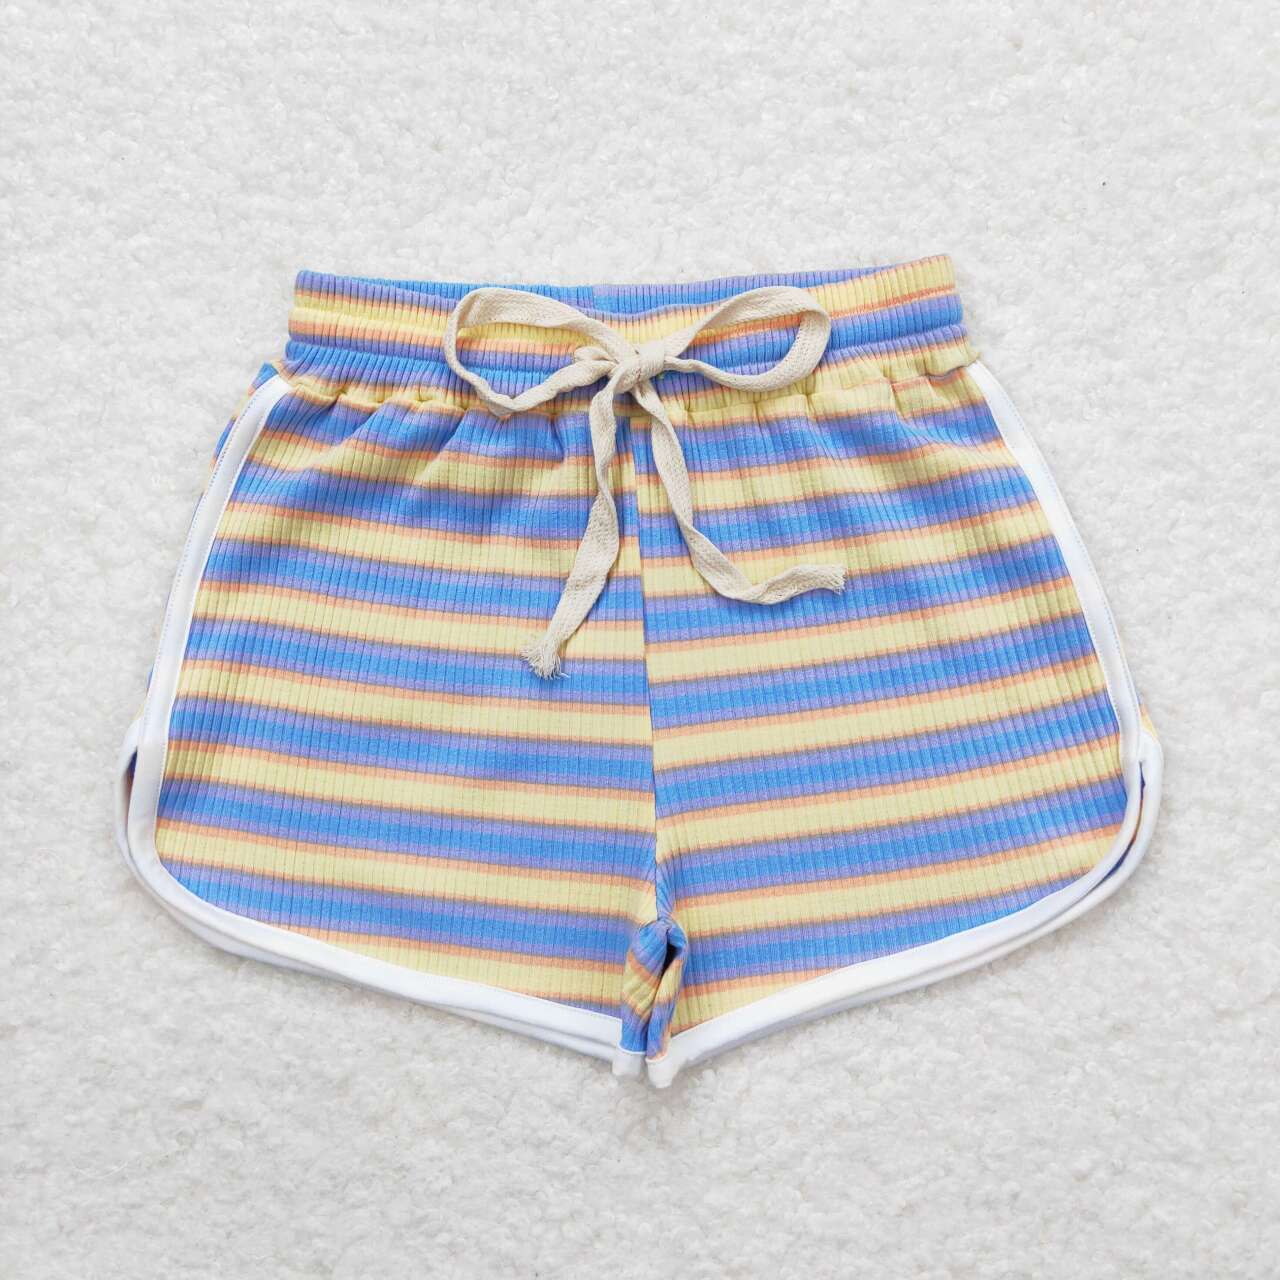 SS0347 Yellow and blue thick pinstriped shorts